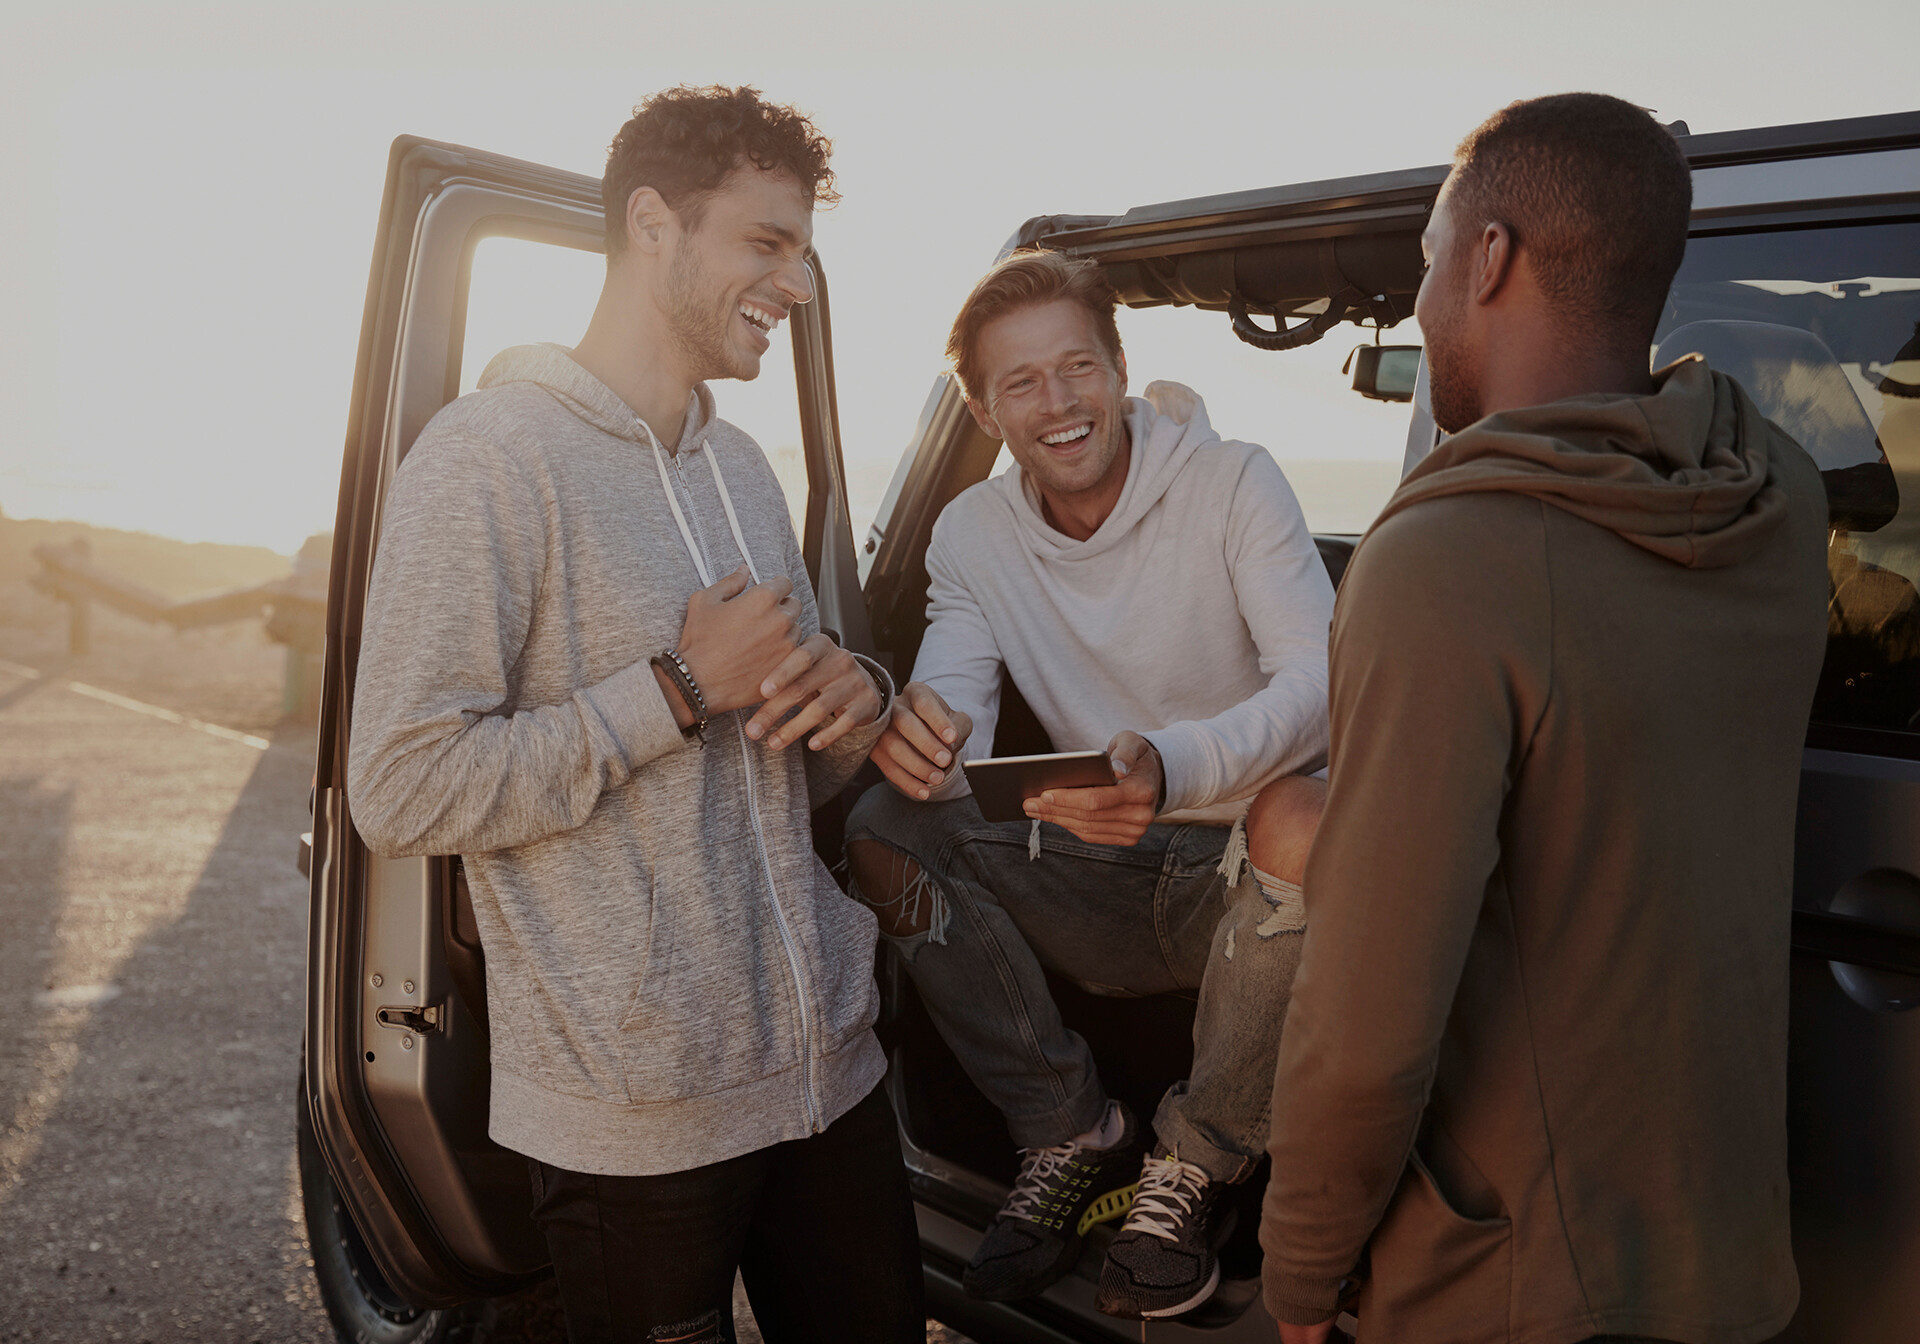 Three guys laughing in a car